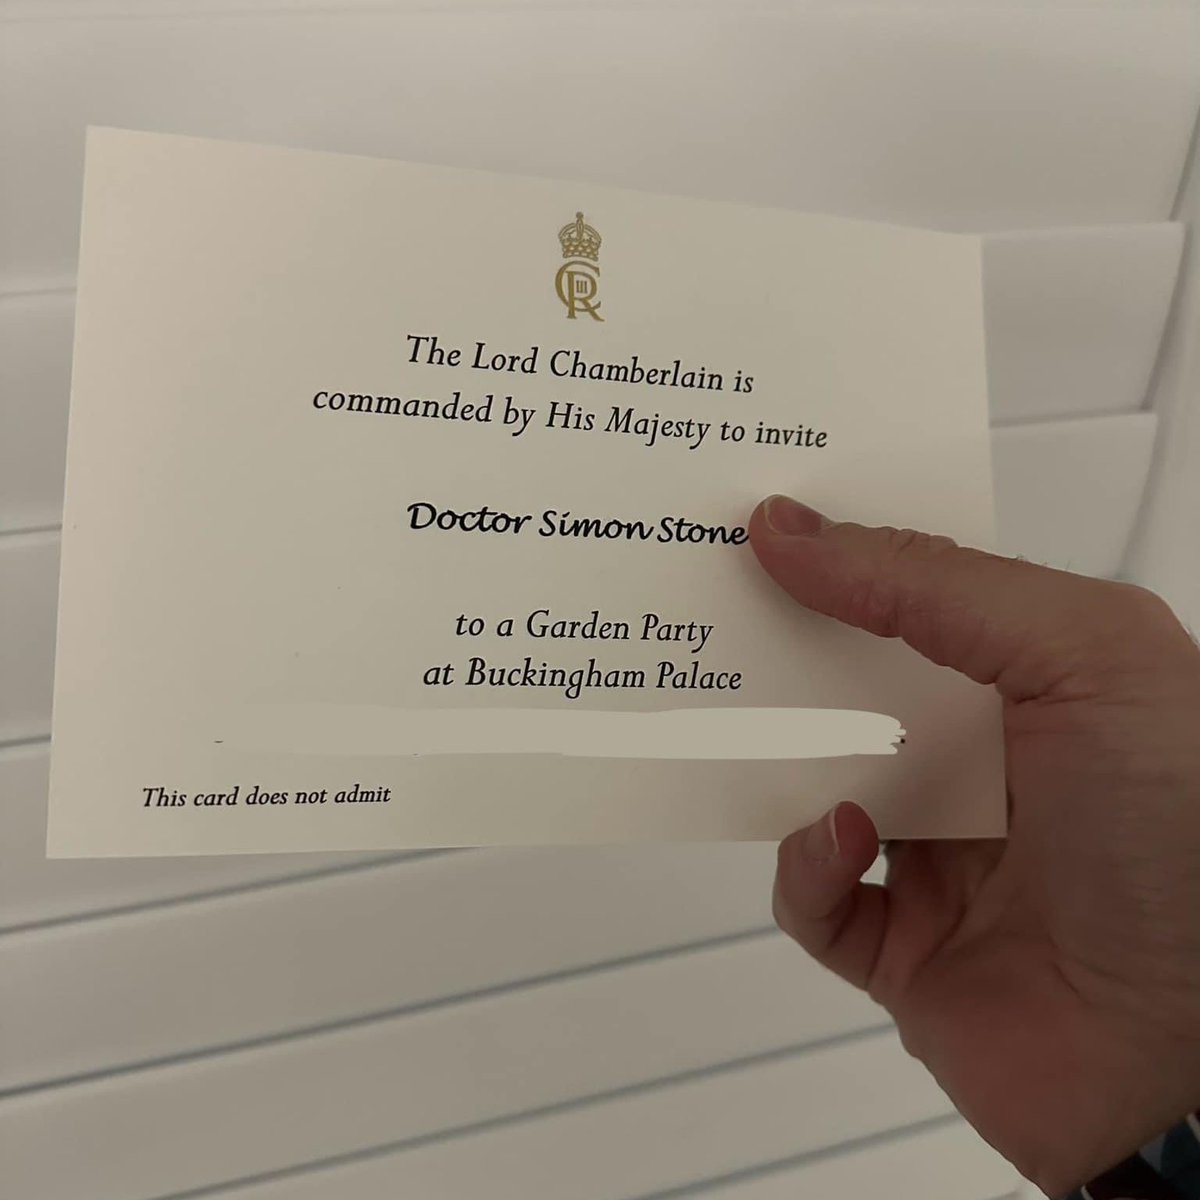 We are delighted to announce that past pupil Simon S has received an invitation to attend a Garden Party at Buckingham Palace, His Majesty King Charles III. This invitation is in recognition of Simon’s international work for people living with chronic illnesses.